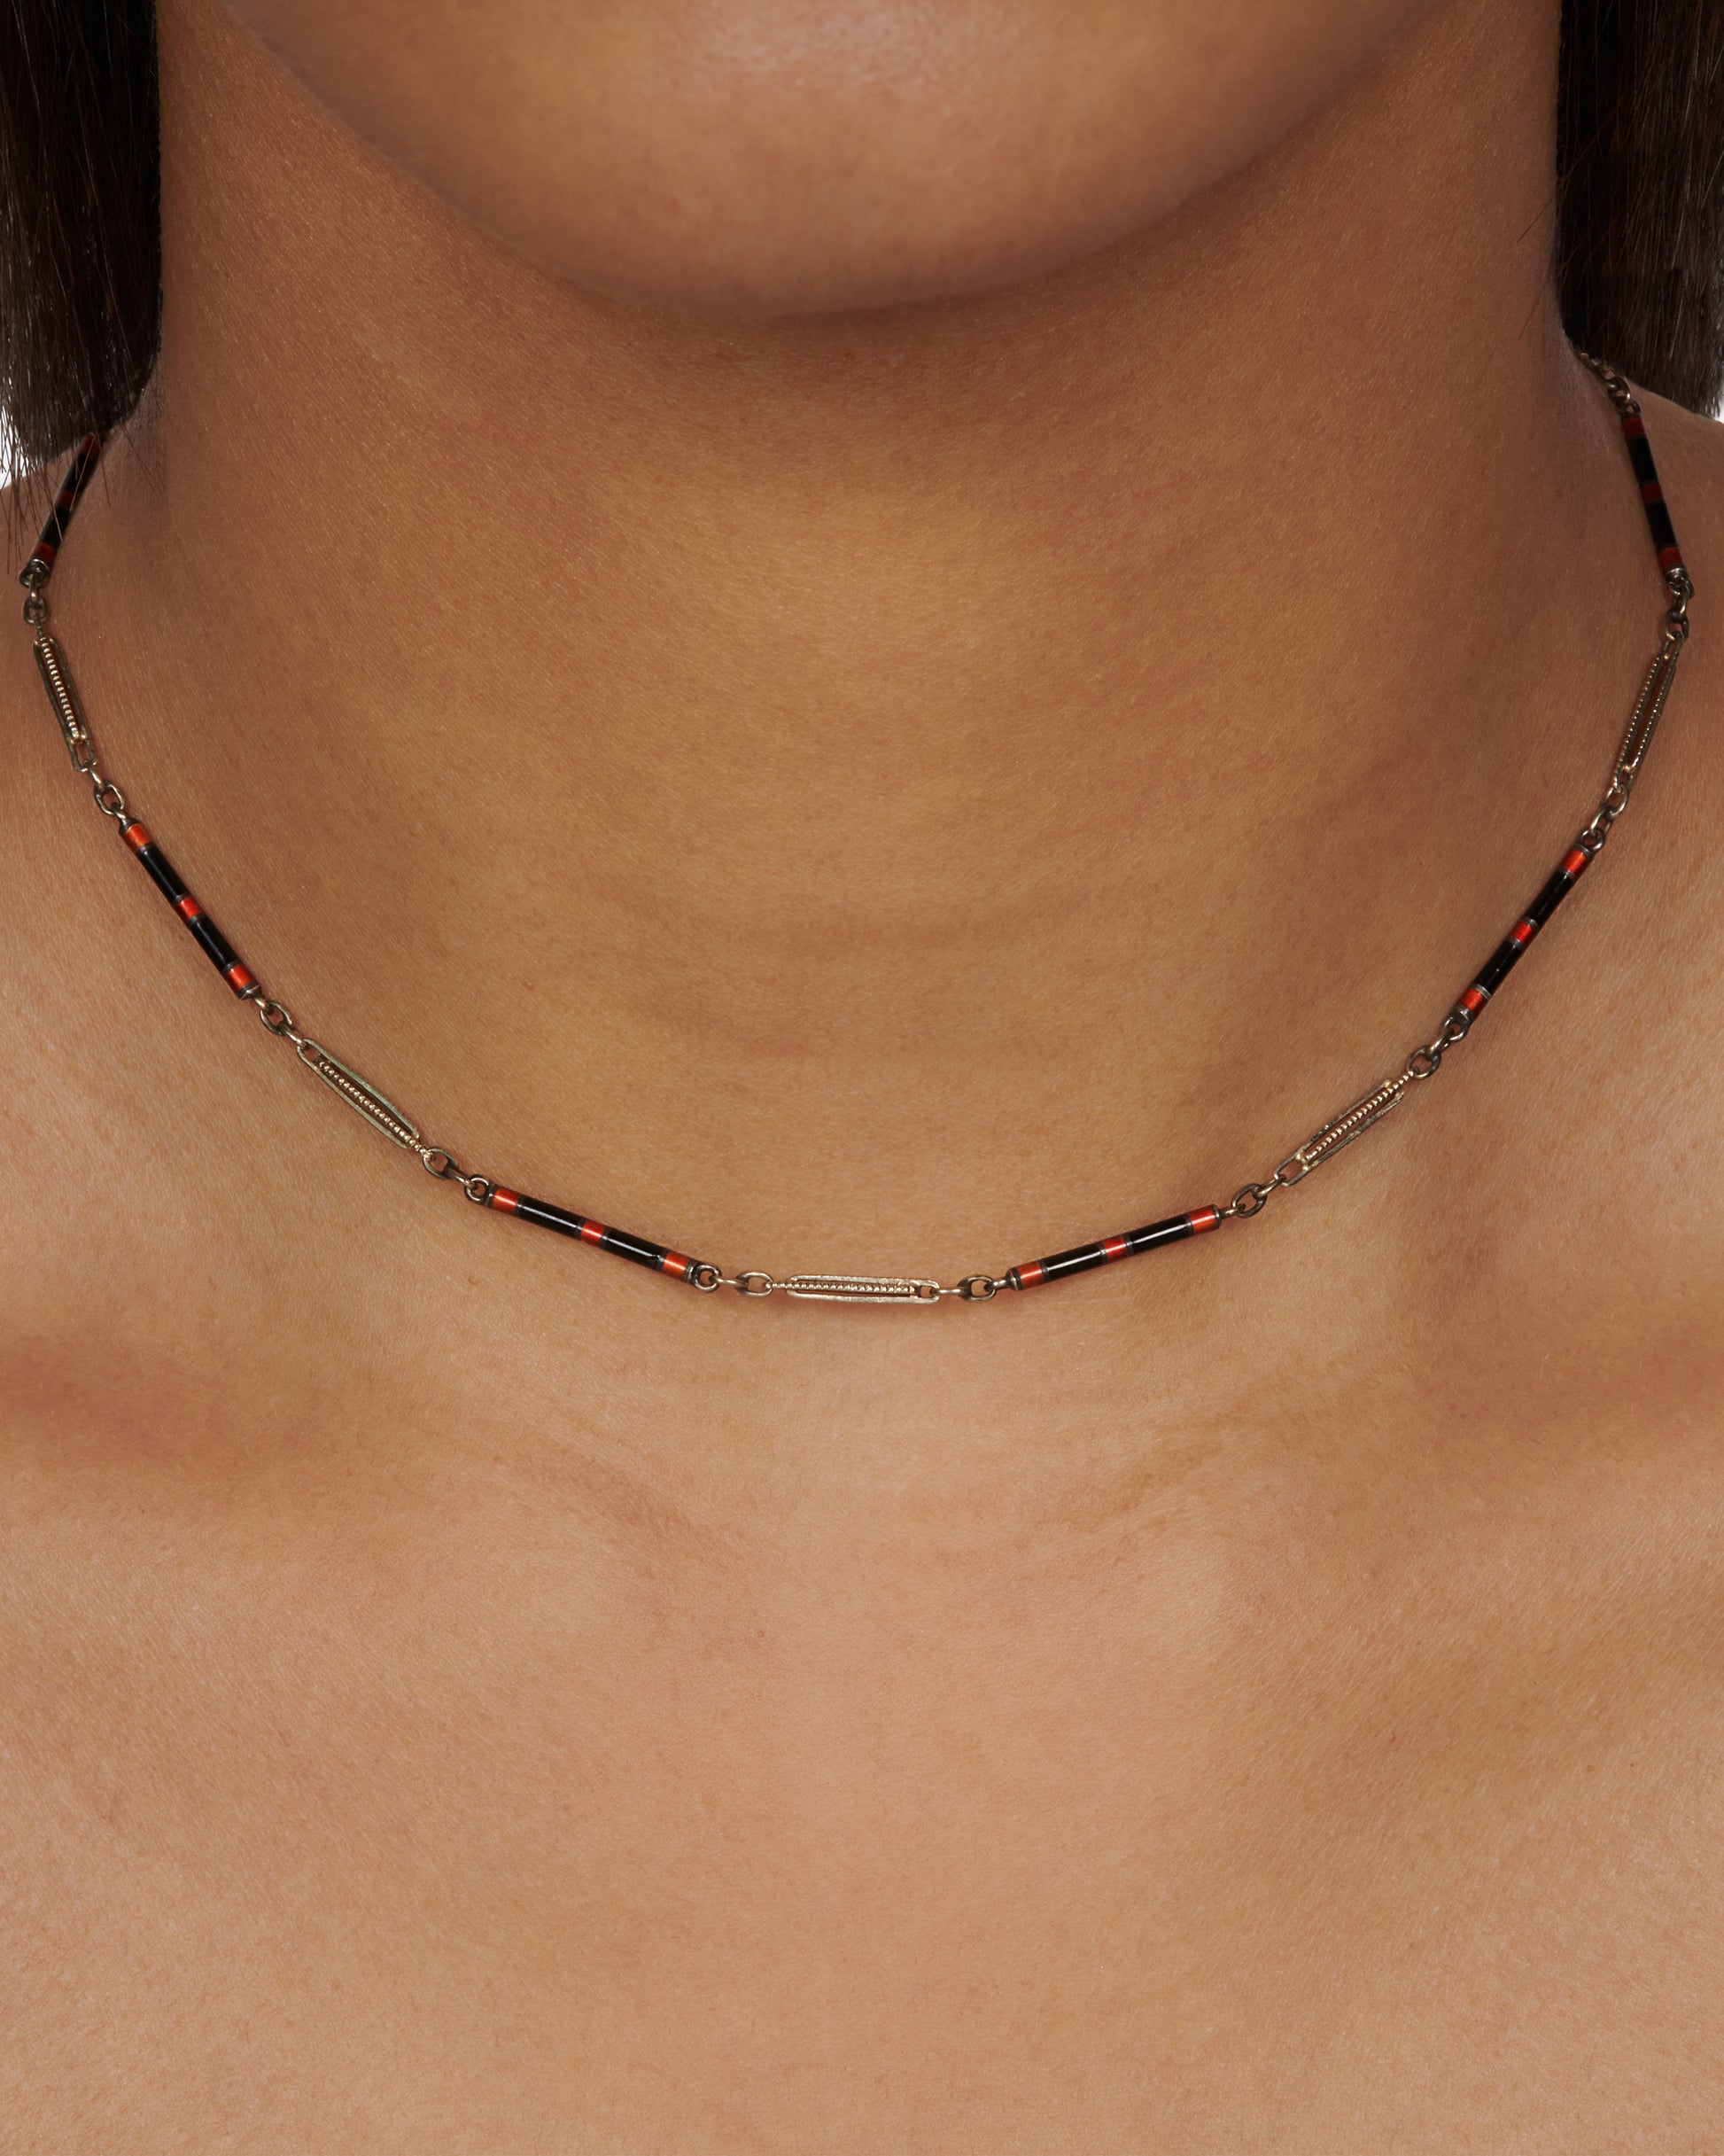 A vintage white gold bar-link chain necklace dotted with red and black enamel—a subtle pop of color for someone with a minimalist sensibility.